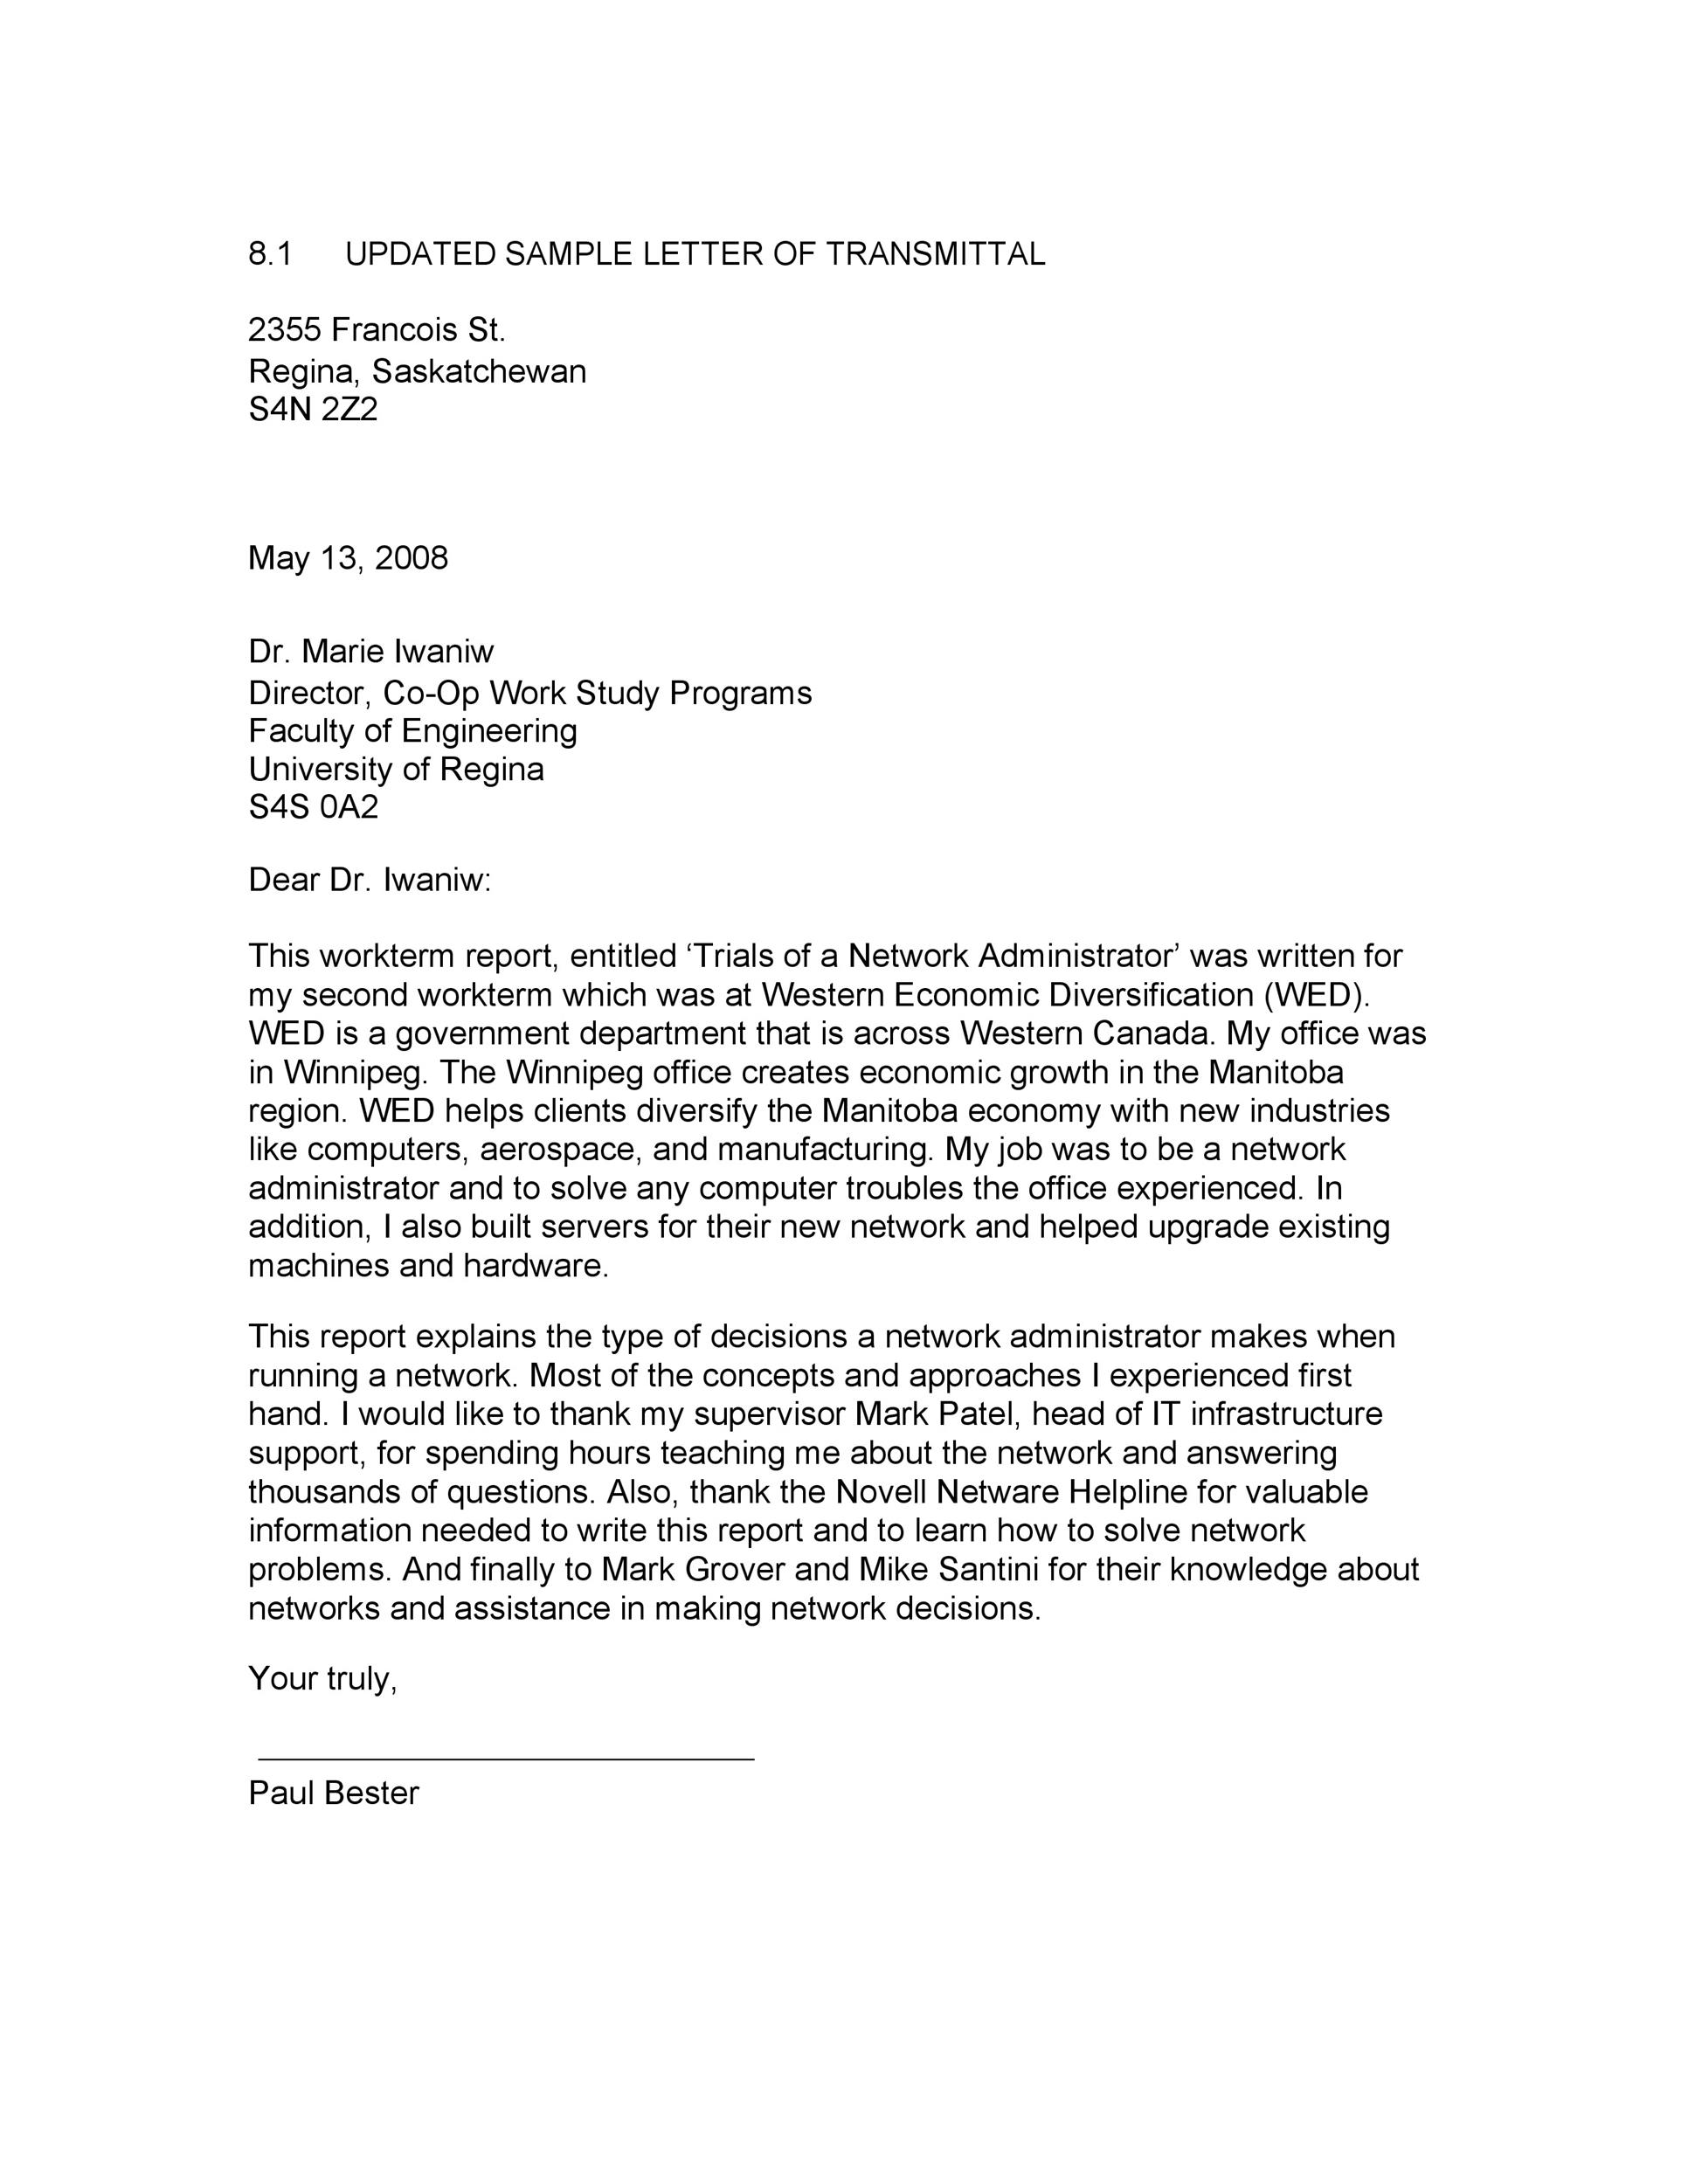 Letter Of Transmittal Engineering from templatelab.com